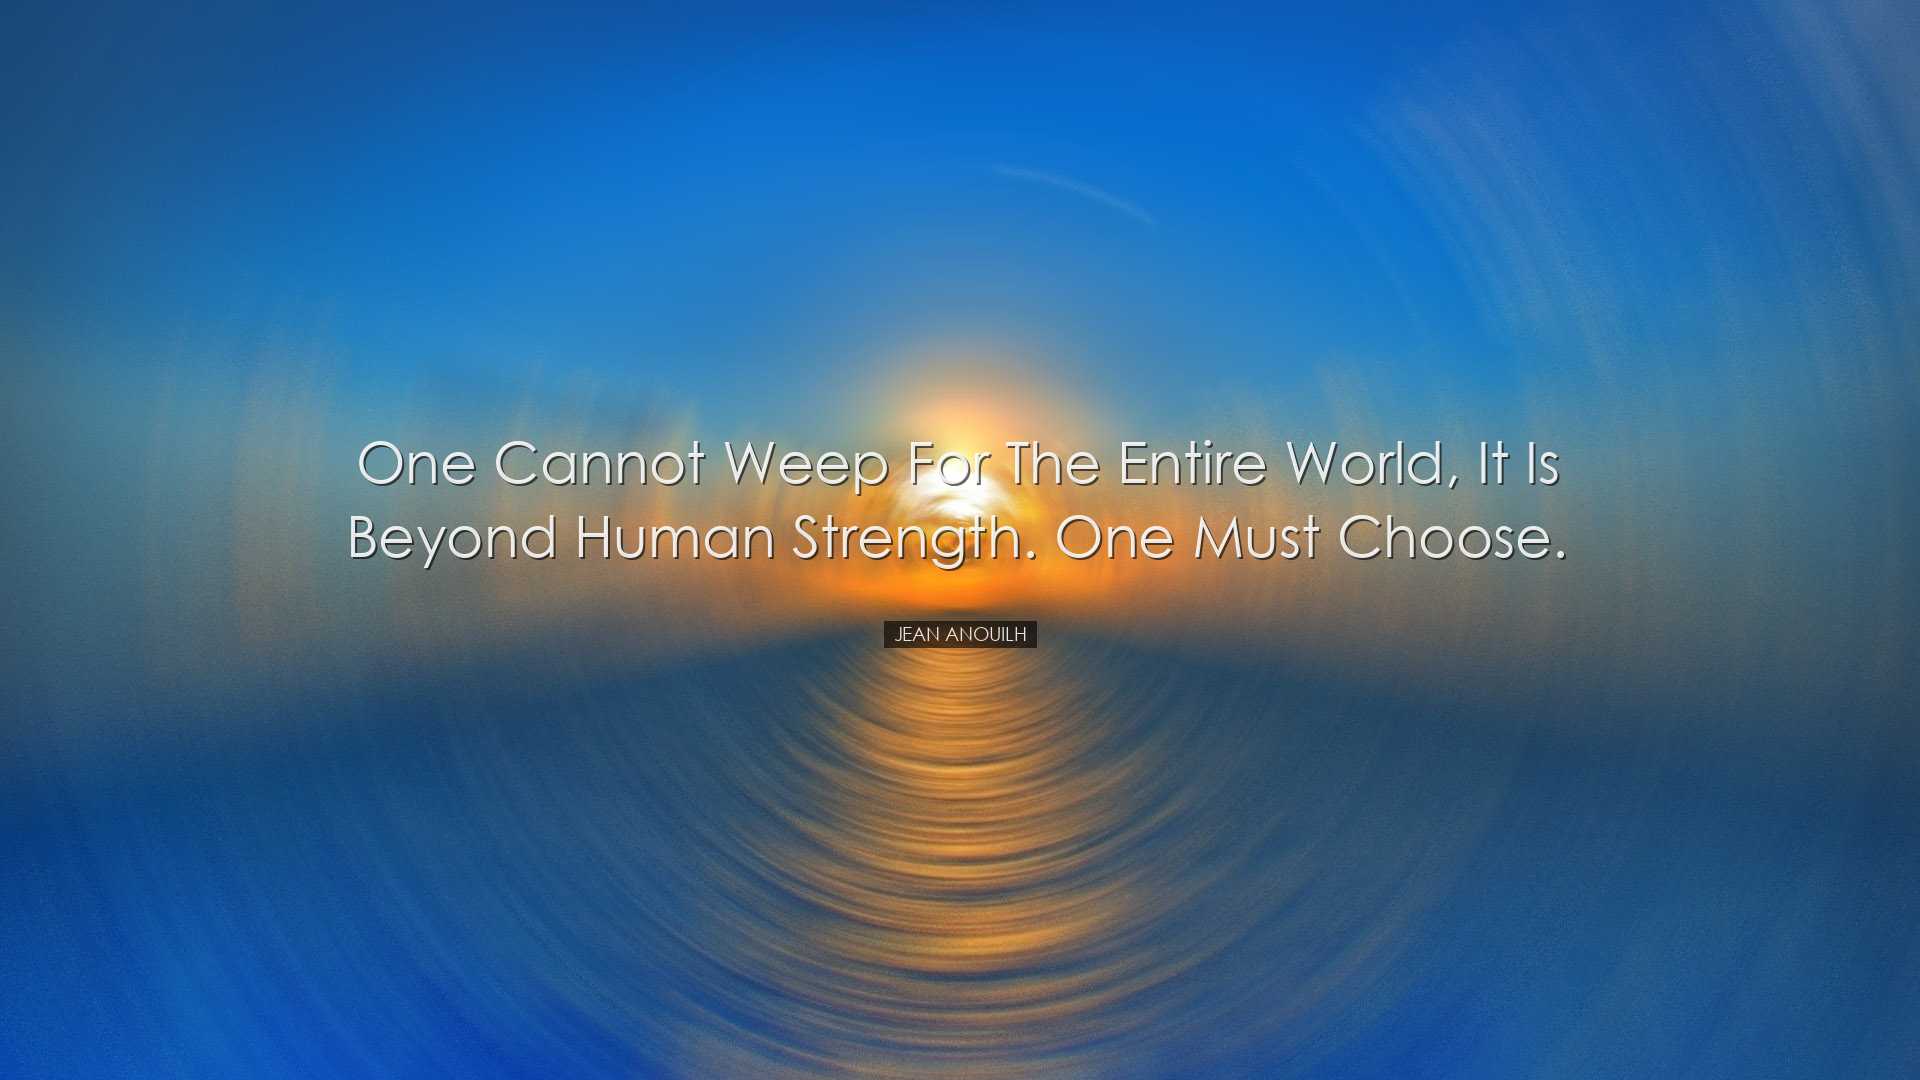 One cannot weep for the entire world, it is beyond human strength.